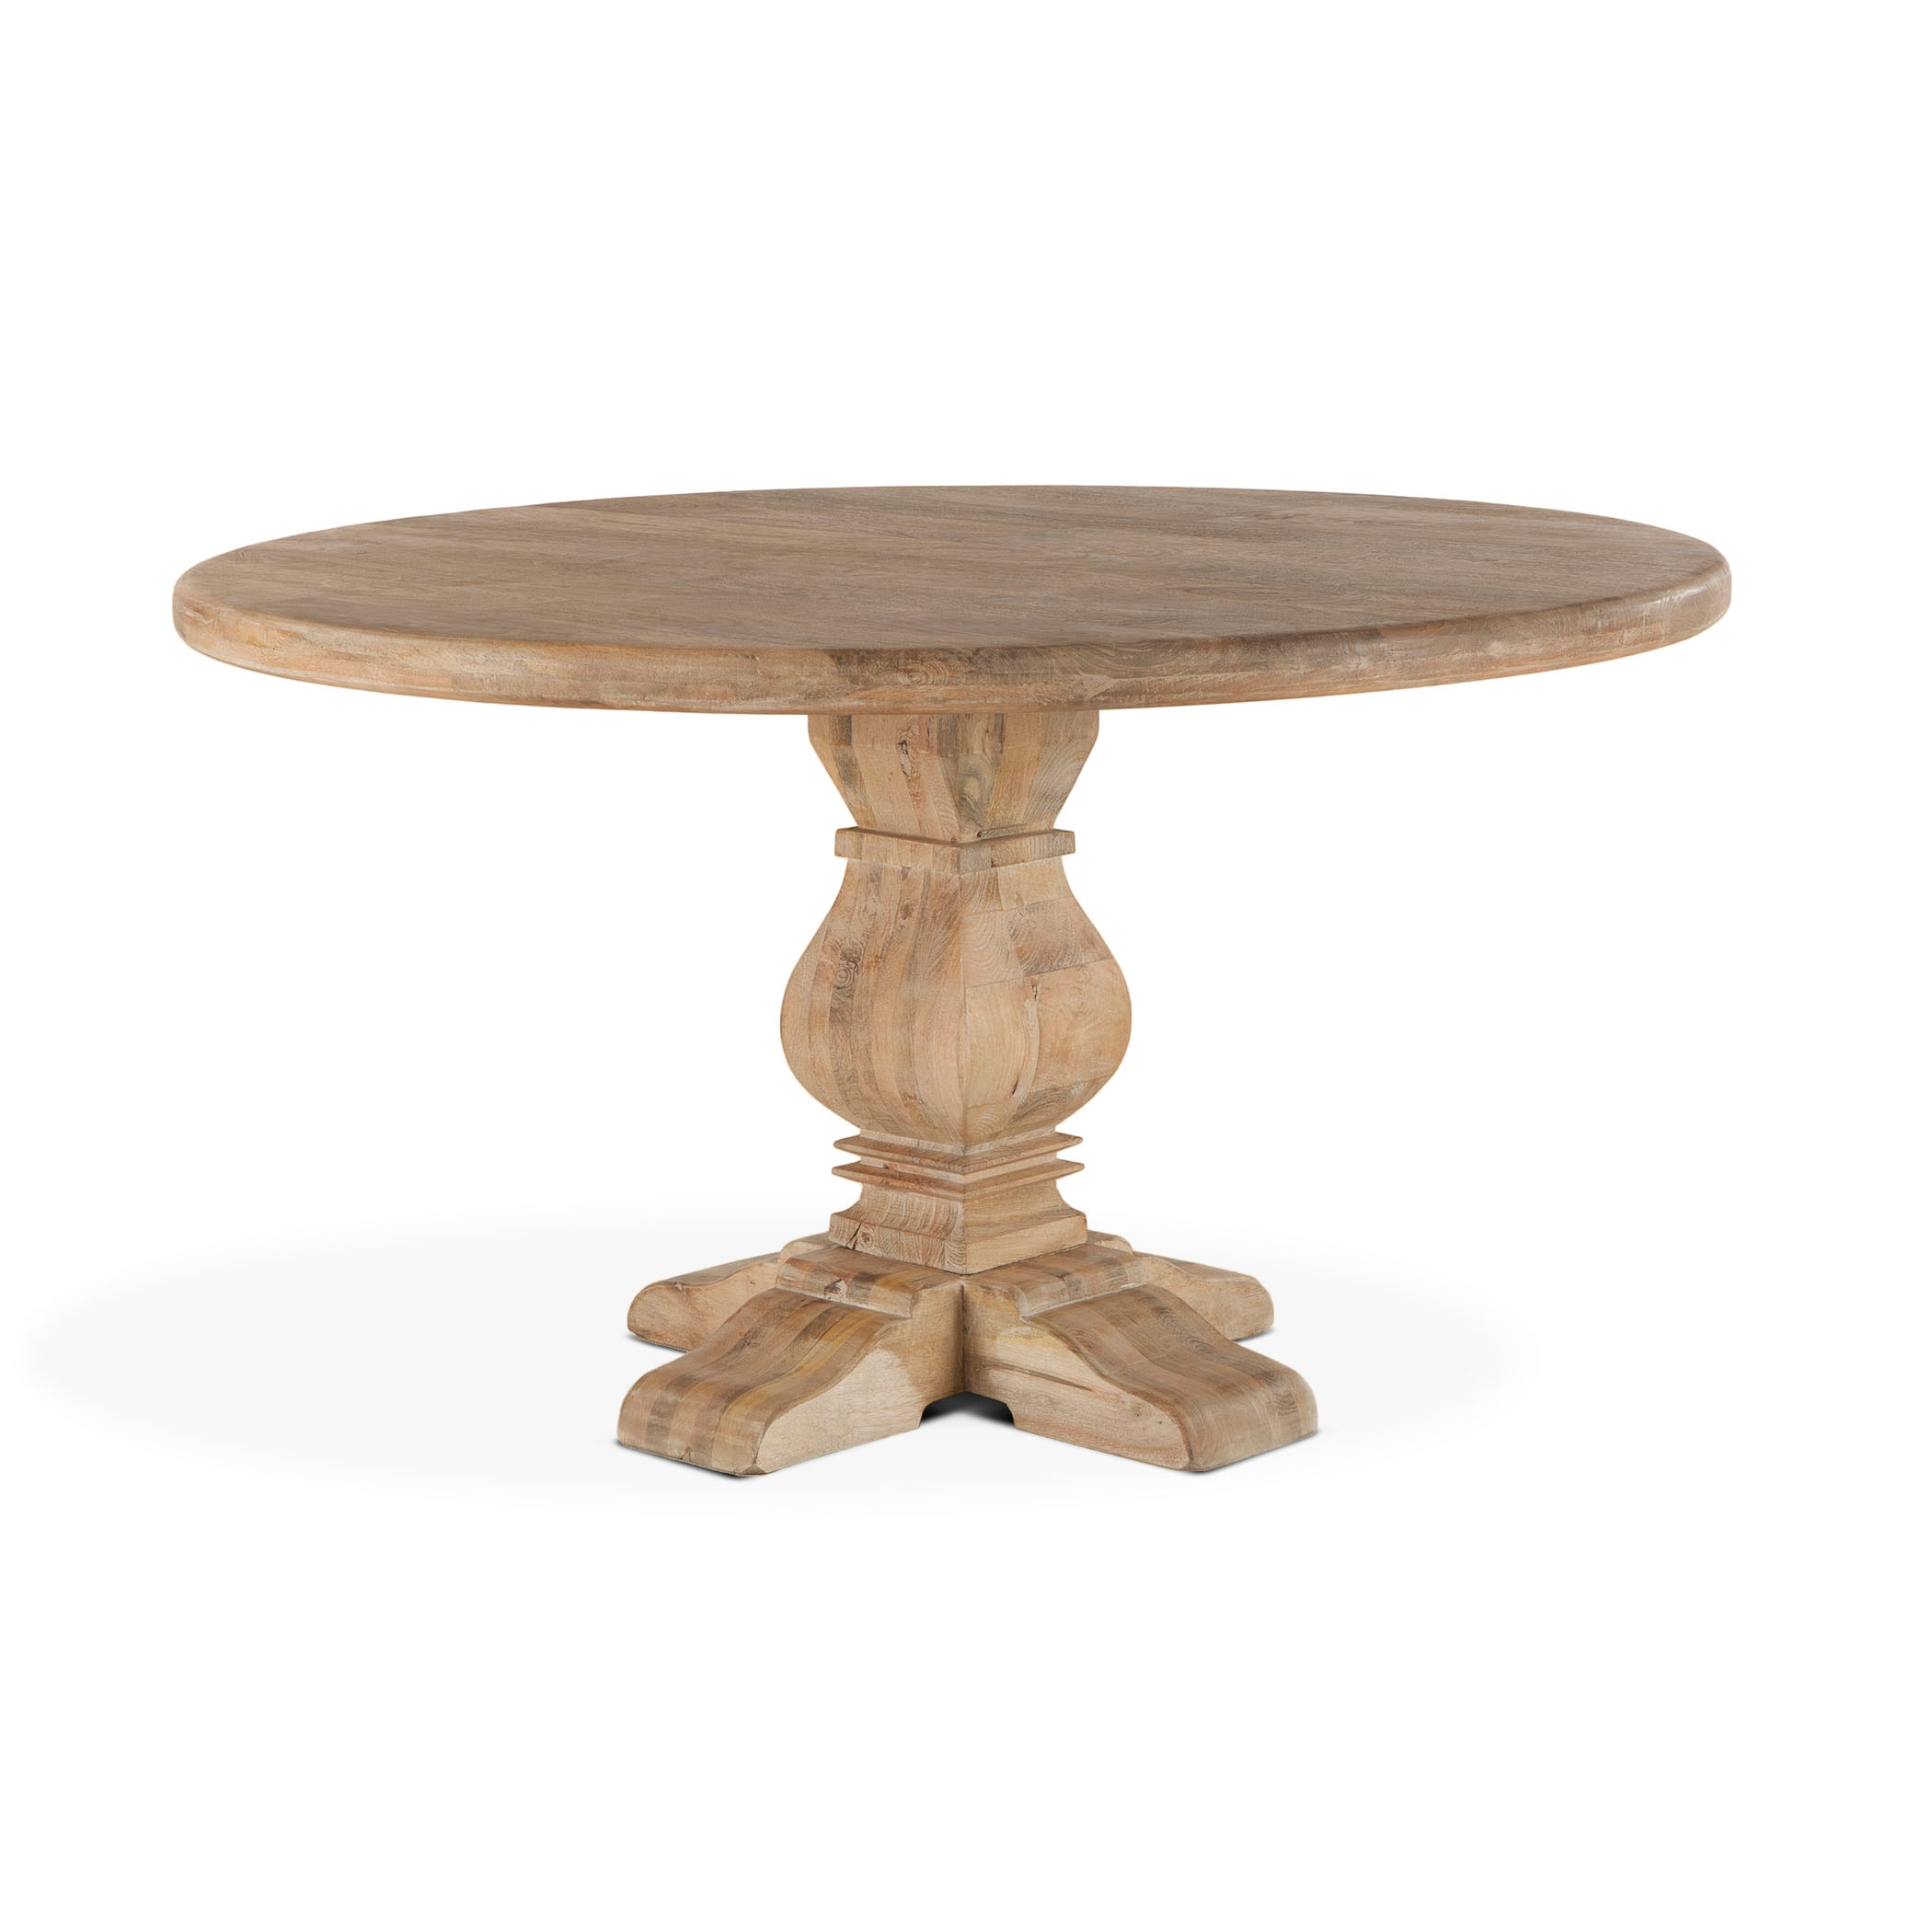 San Rafael Round Dining Table In, 54 Inch Round Pedestal Table